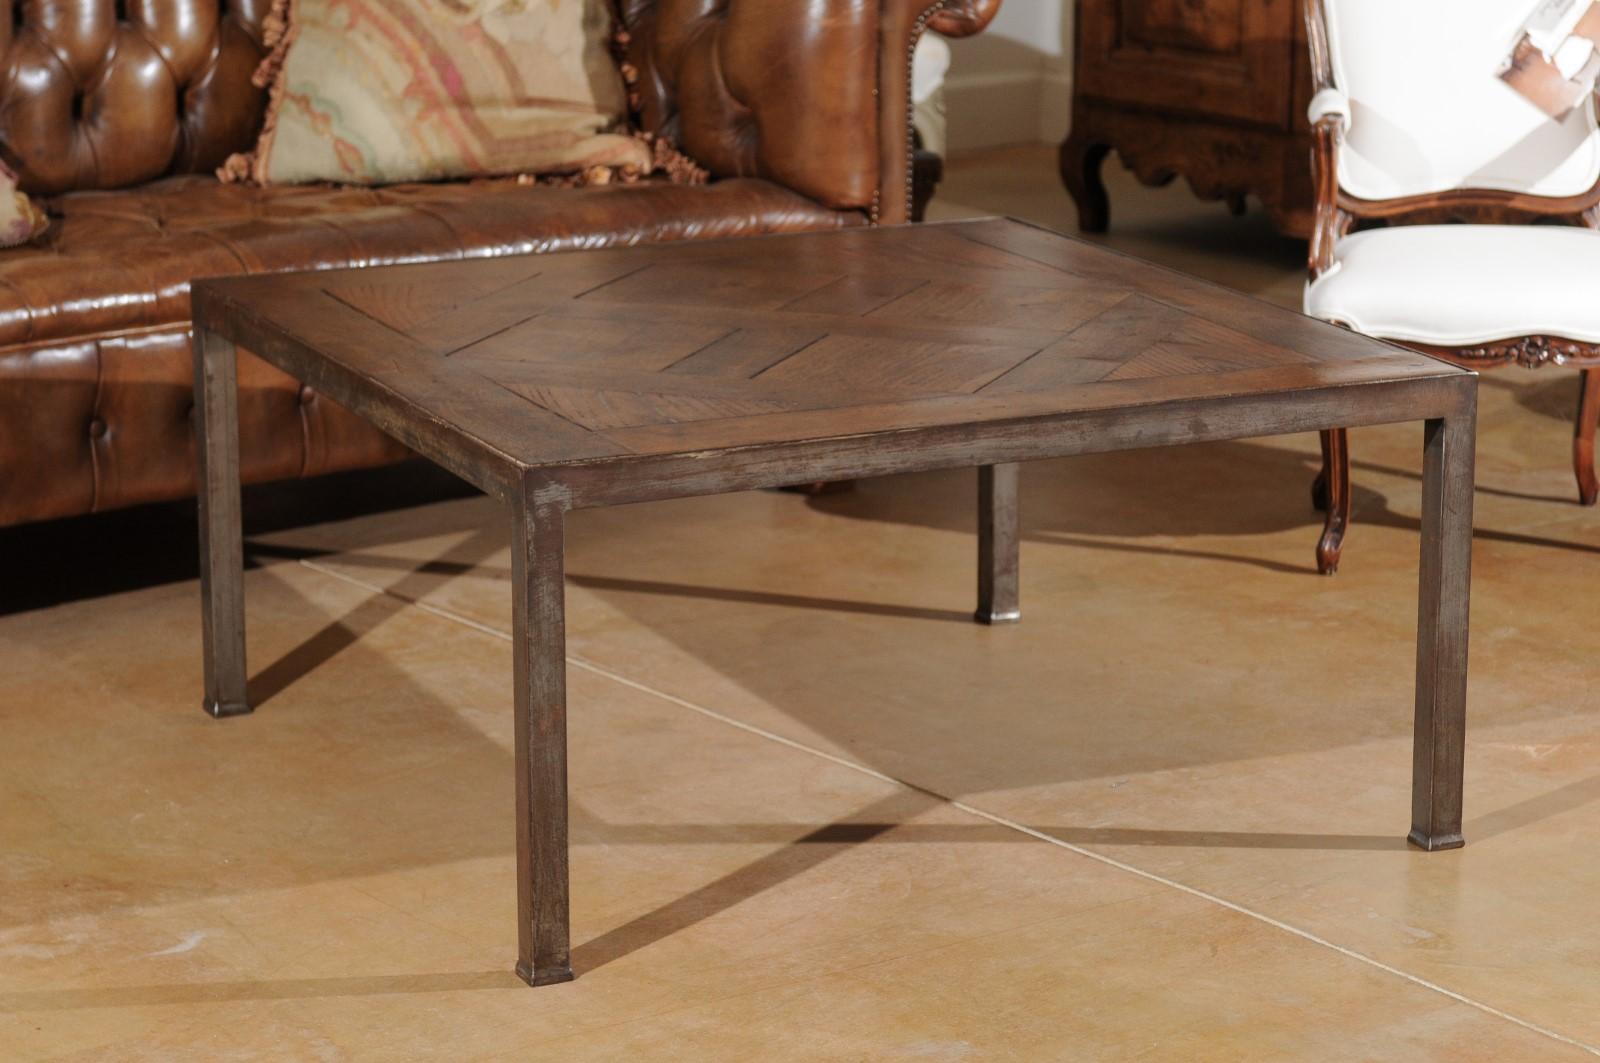 A French coffee table from the 20th century made of antique walnut parquet top and iron base. This French square shaped coffee table is made of an antique walnut parquet top secured in a sturdy custom made iron base. The top reveals the pattern